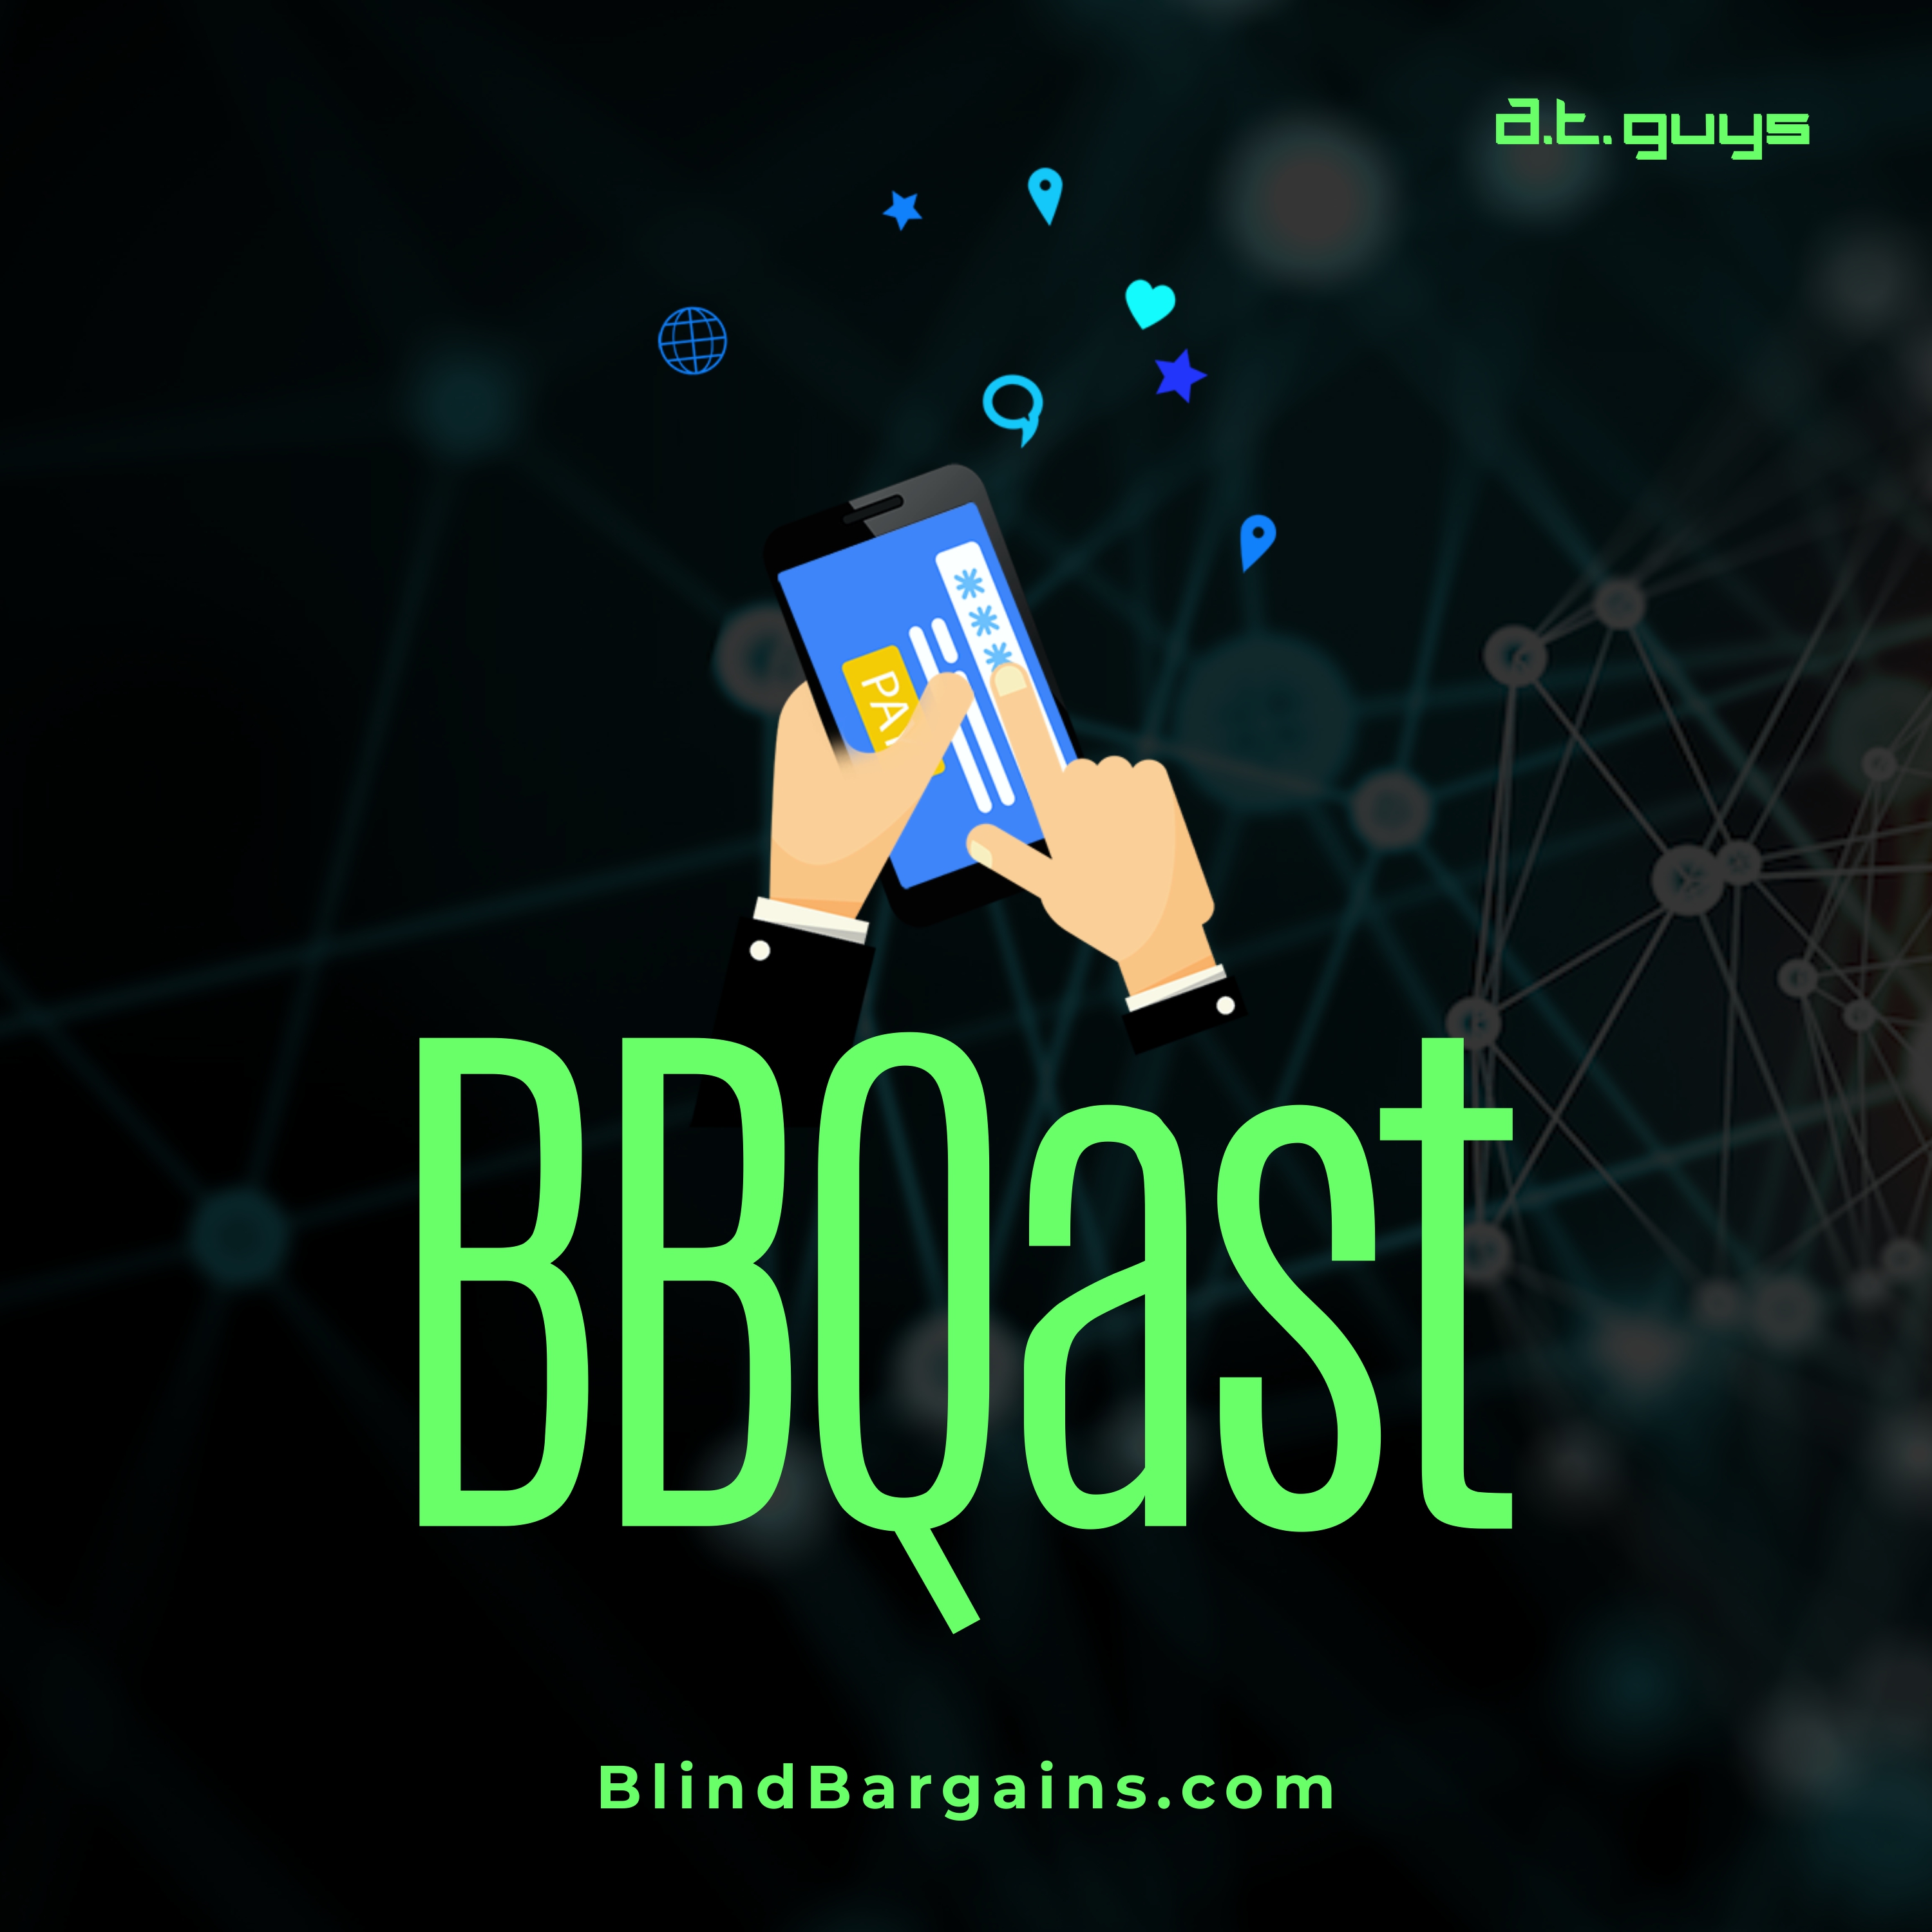 Blind Bargains Audio: Featuring the BB Qast, Technology news, Interviews, and more Podcast artwork